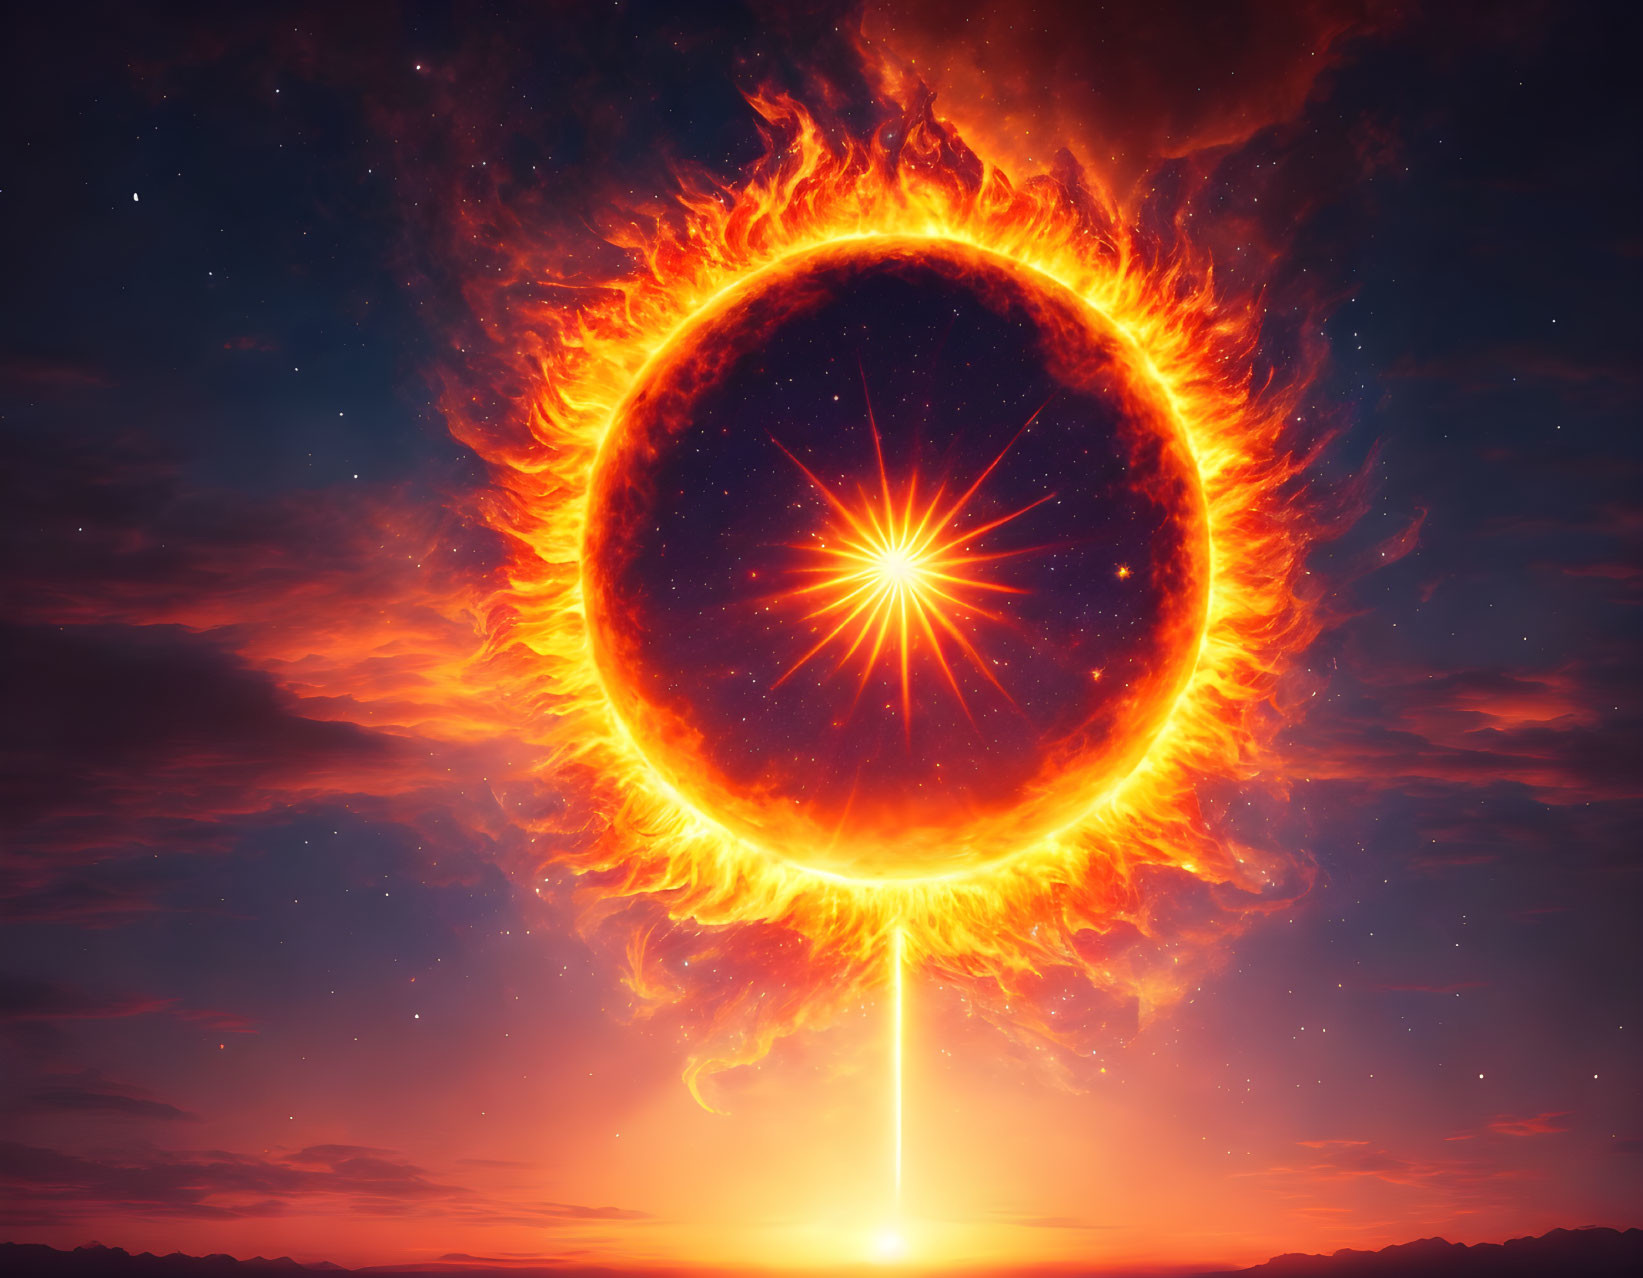 Flaming ring in sky emits bright beam against starry dusk